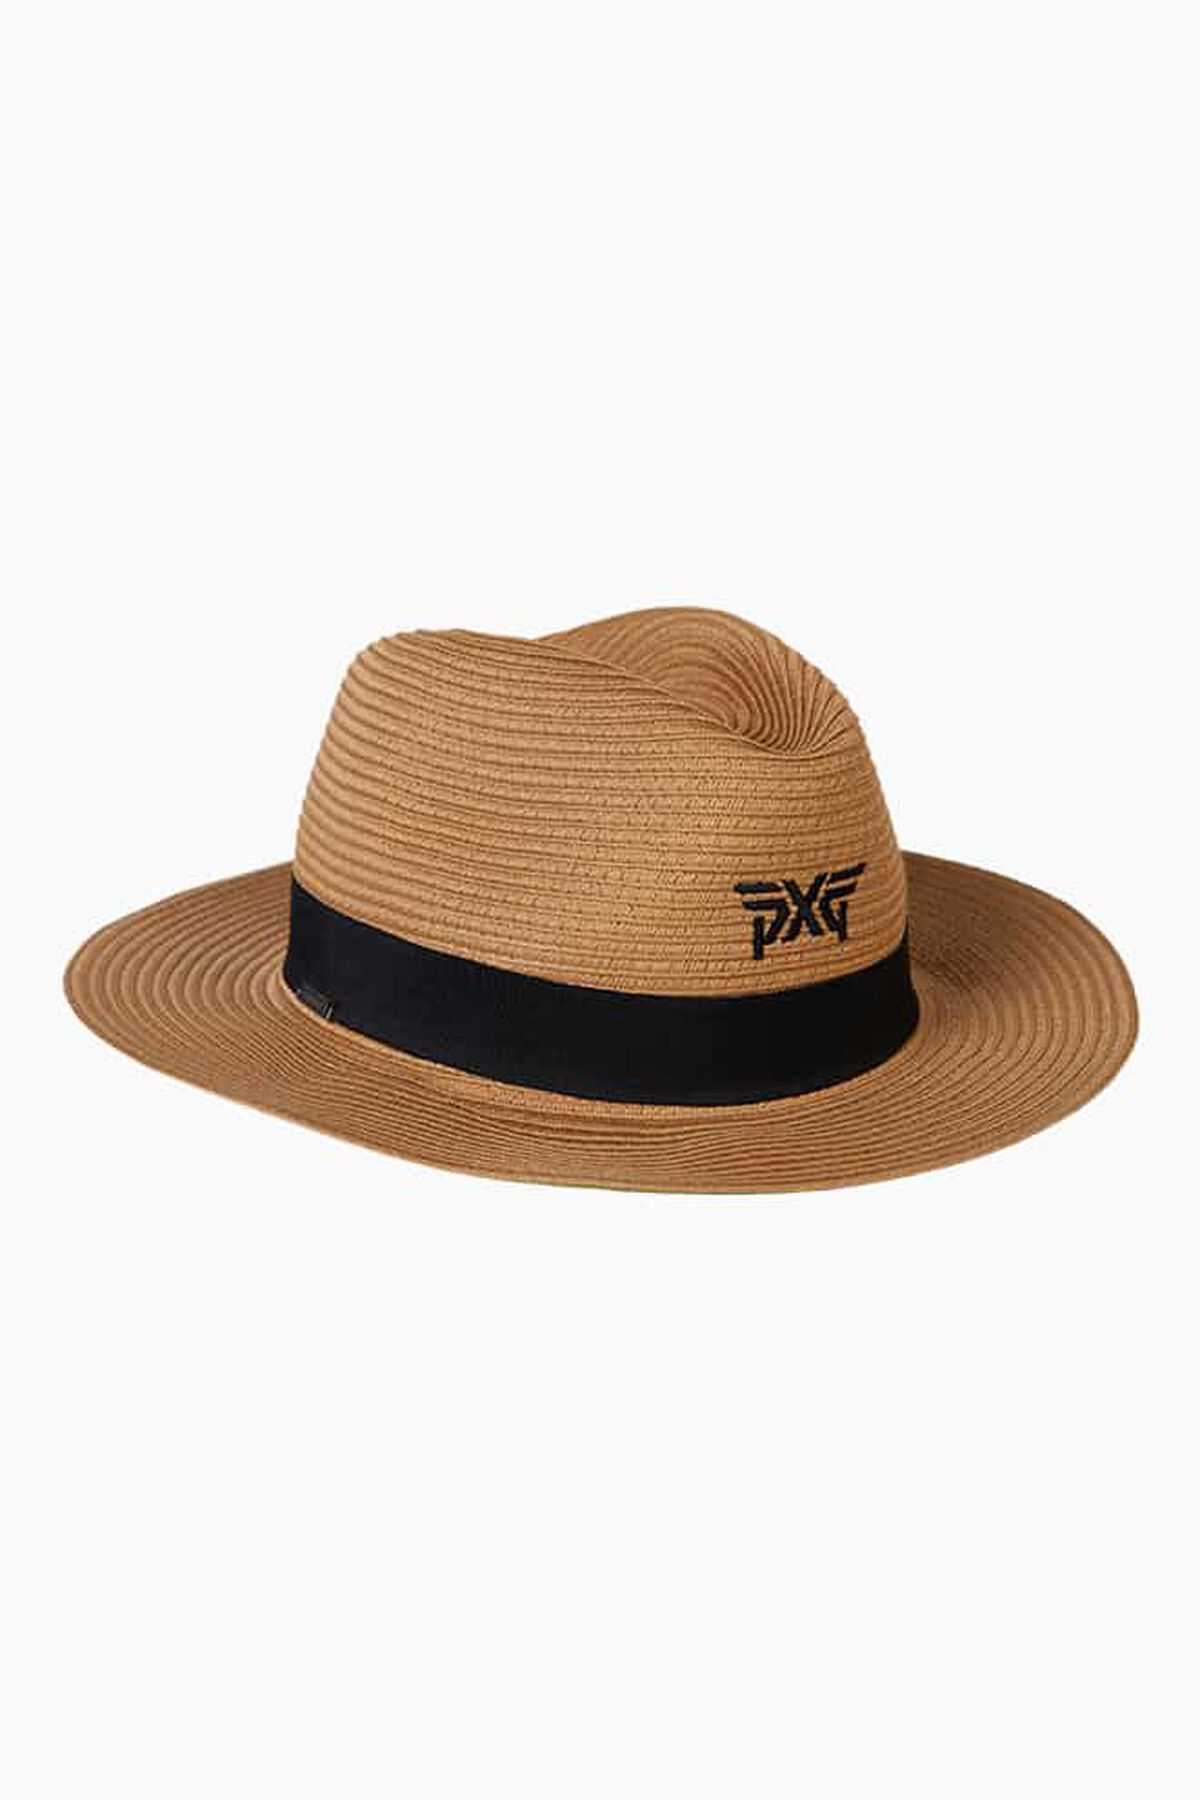 Straw Sun Hat  Shop the Highest Quality Golf Apparel, Gear, Accessories  and Golf Clubs at PXG